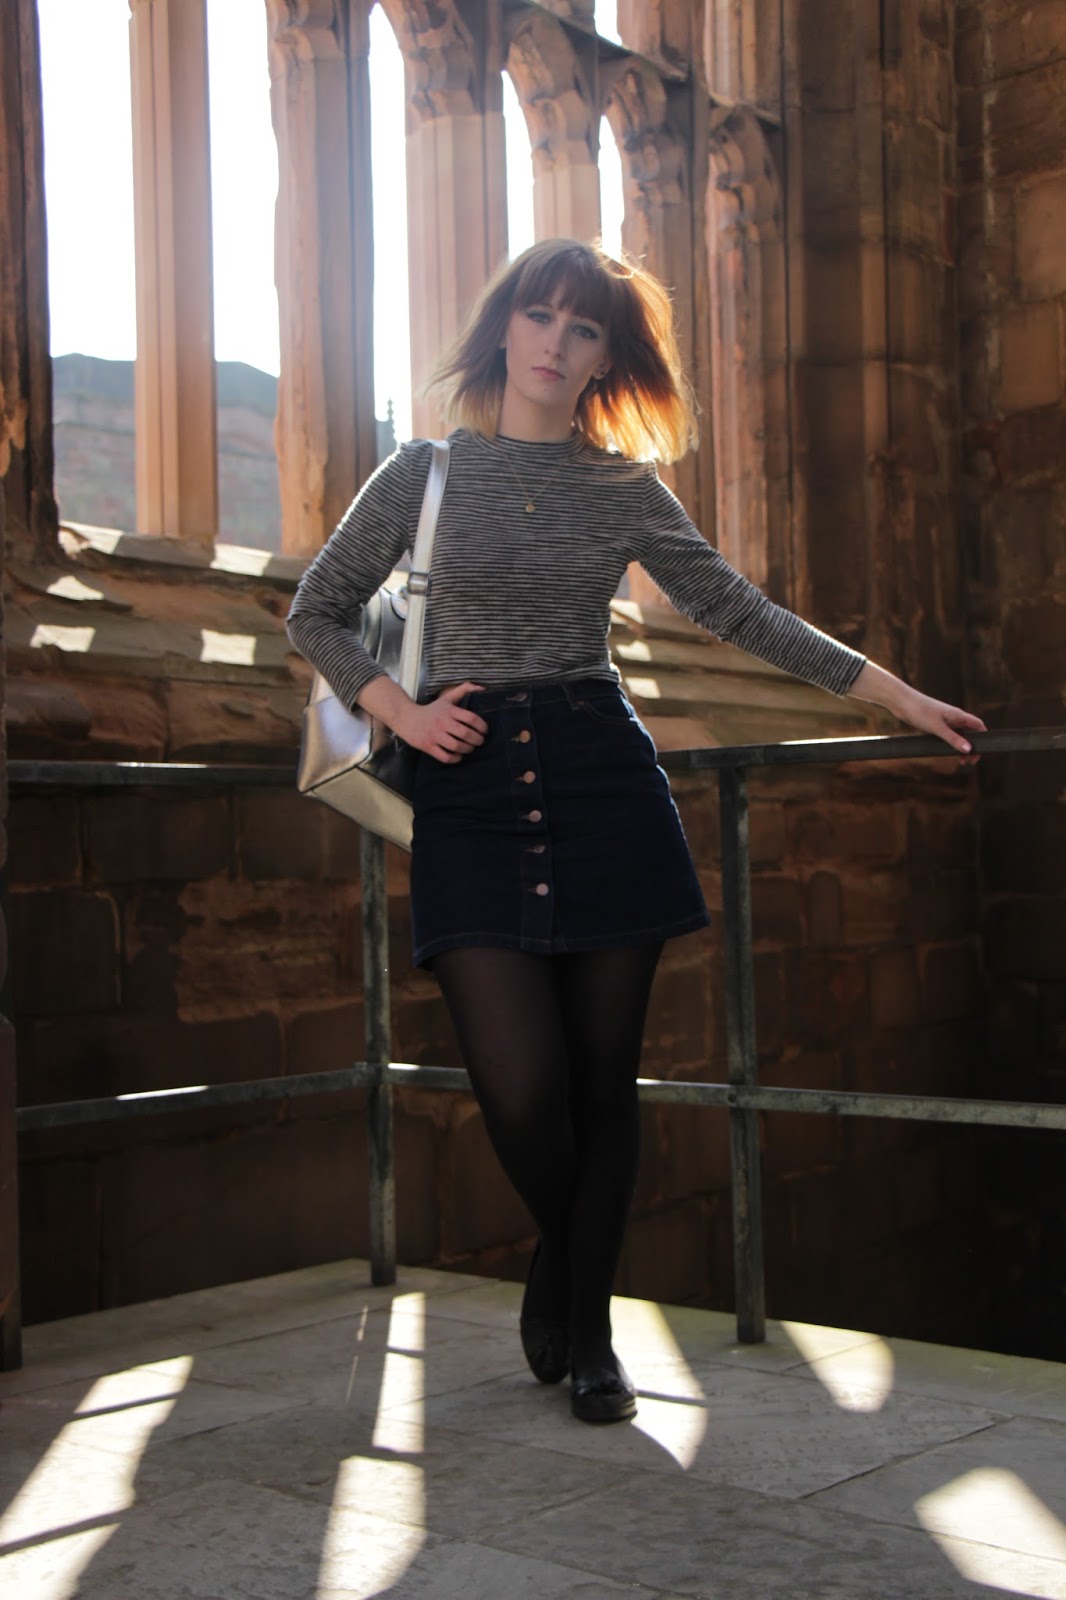 denim skirt stripes sixties outfit